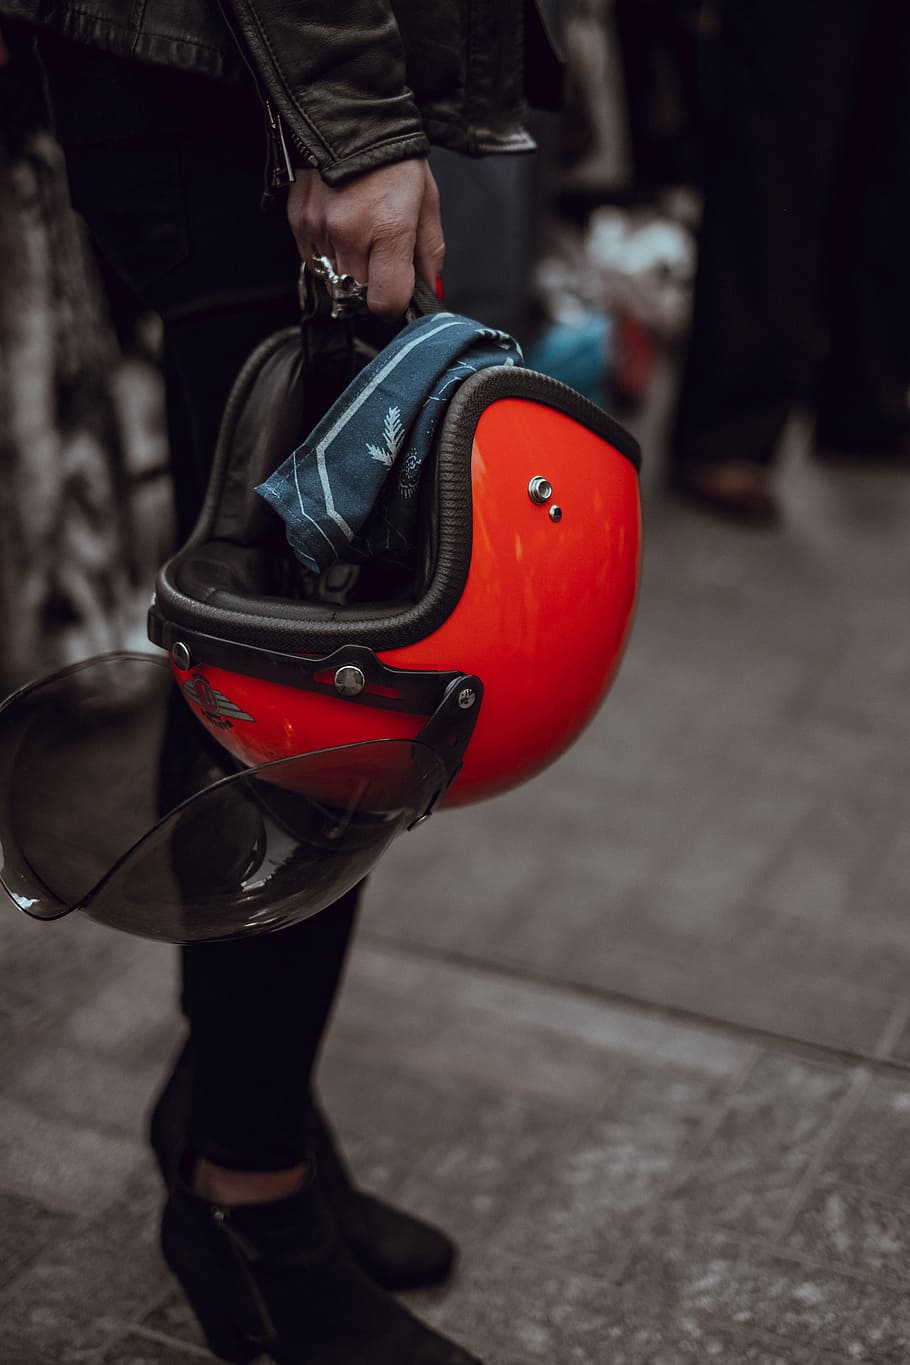 people, woman, helmet, head, gear, travel, ride, human body part, low section, focus on foreground